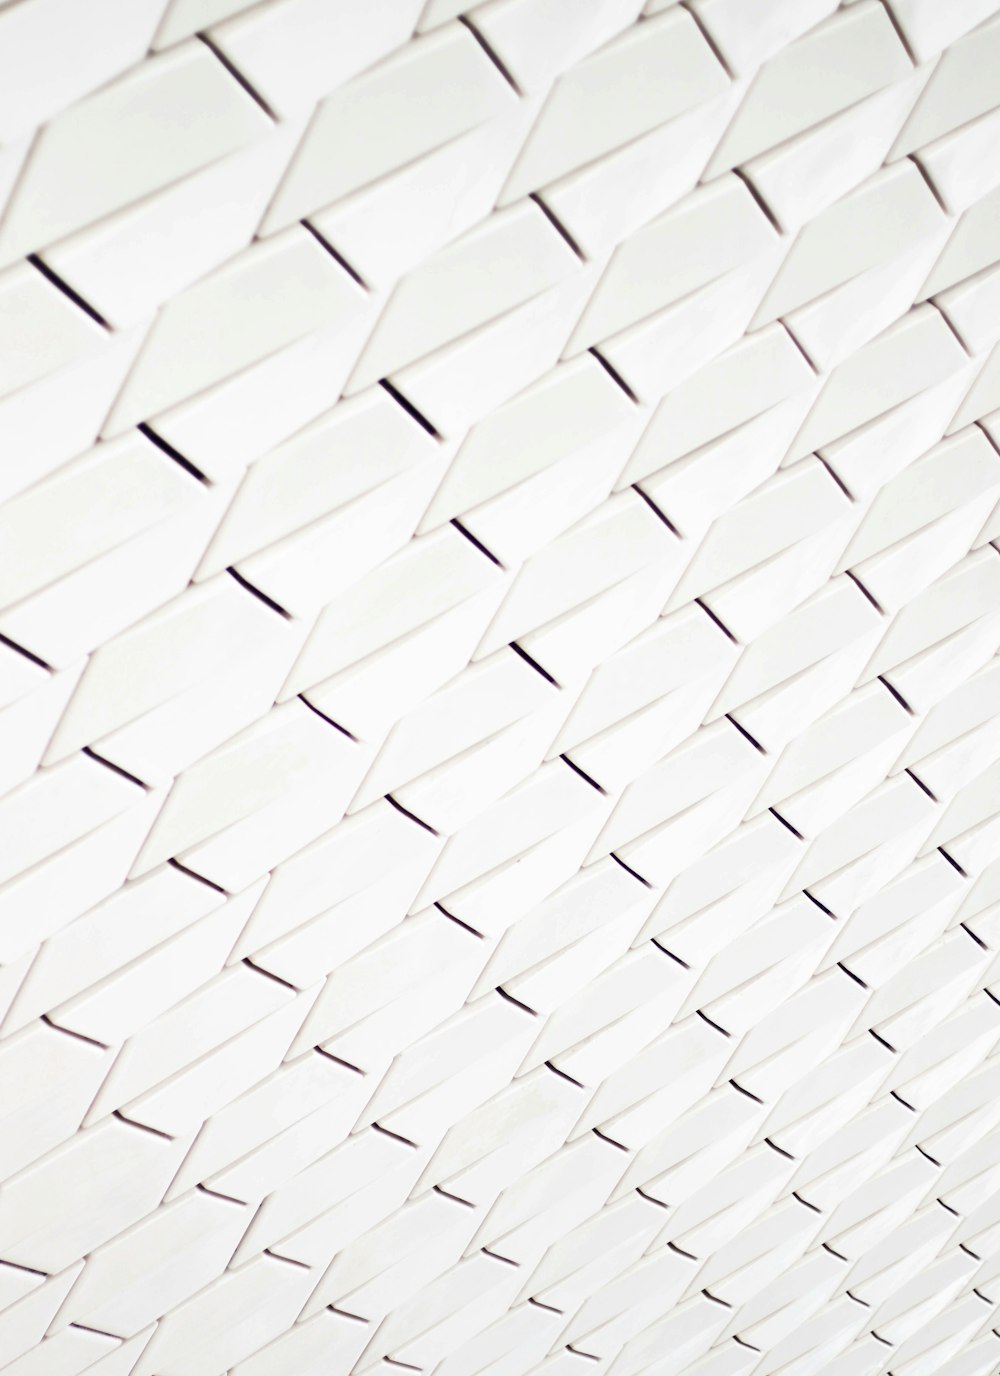 A pattern of white geometric shapes in a facade